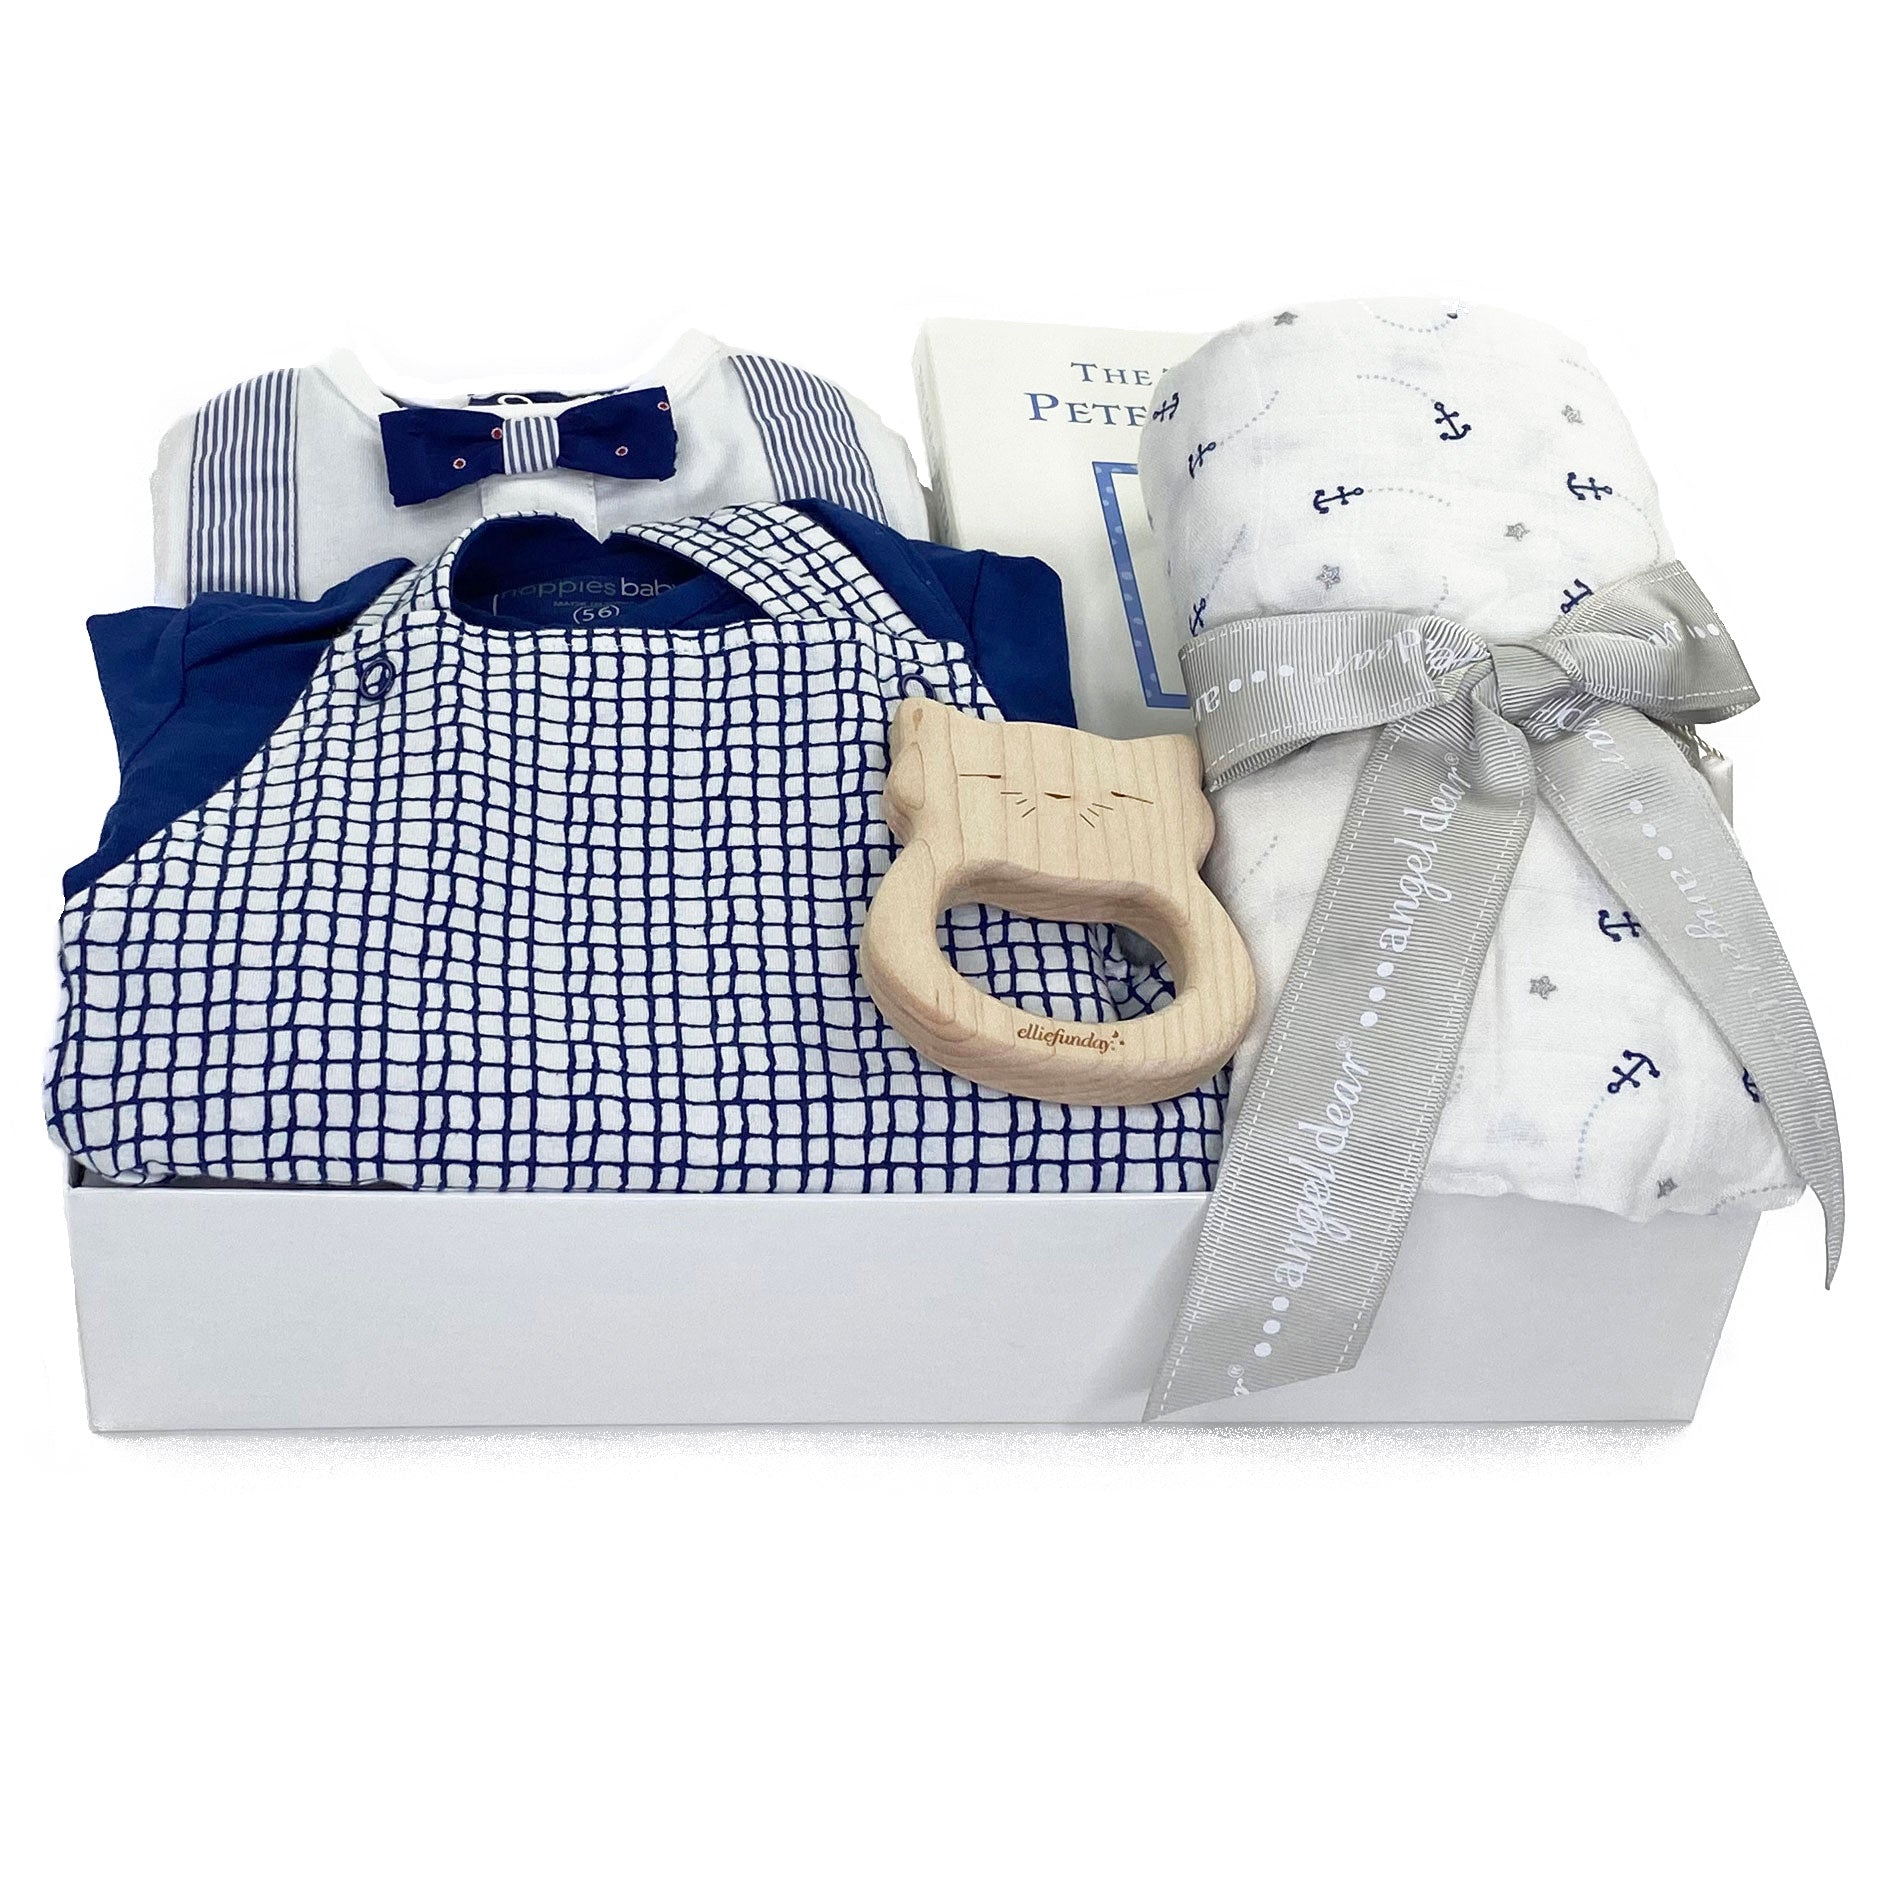 Adorable Baby Boy Gift Box with romper, tee, onesie, blanket, book and toy at Bonjour Baby Baskets